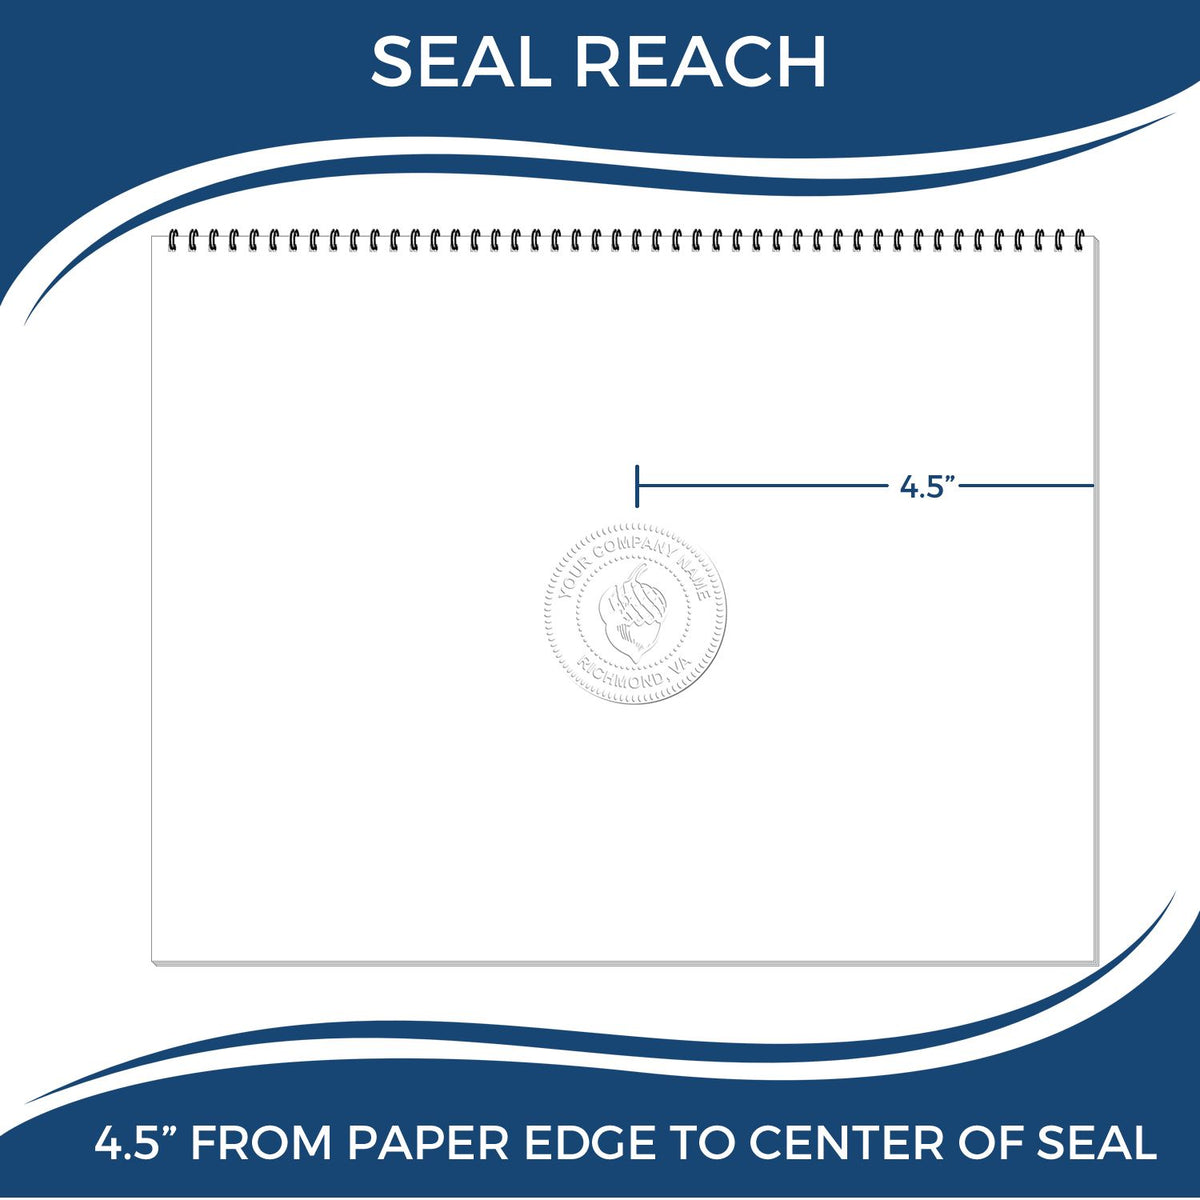 An infographic showing the seal reach which is represented by a ruler and a miniature seal image of the Extended Long Reach Mississippi Architect Seal Embosser